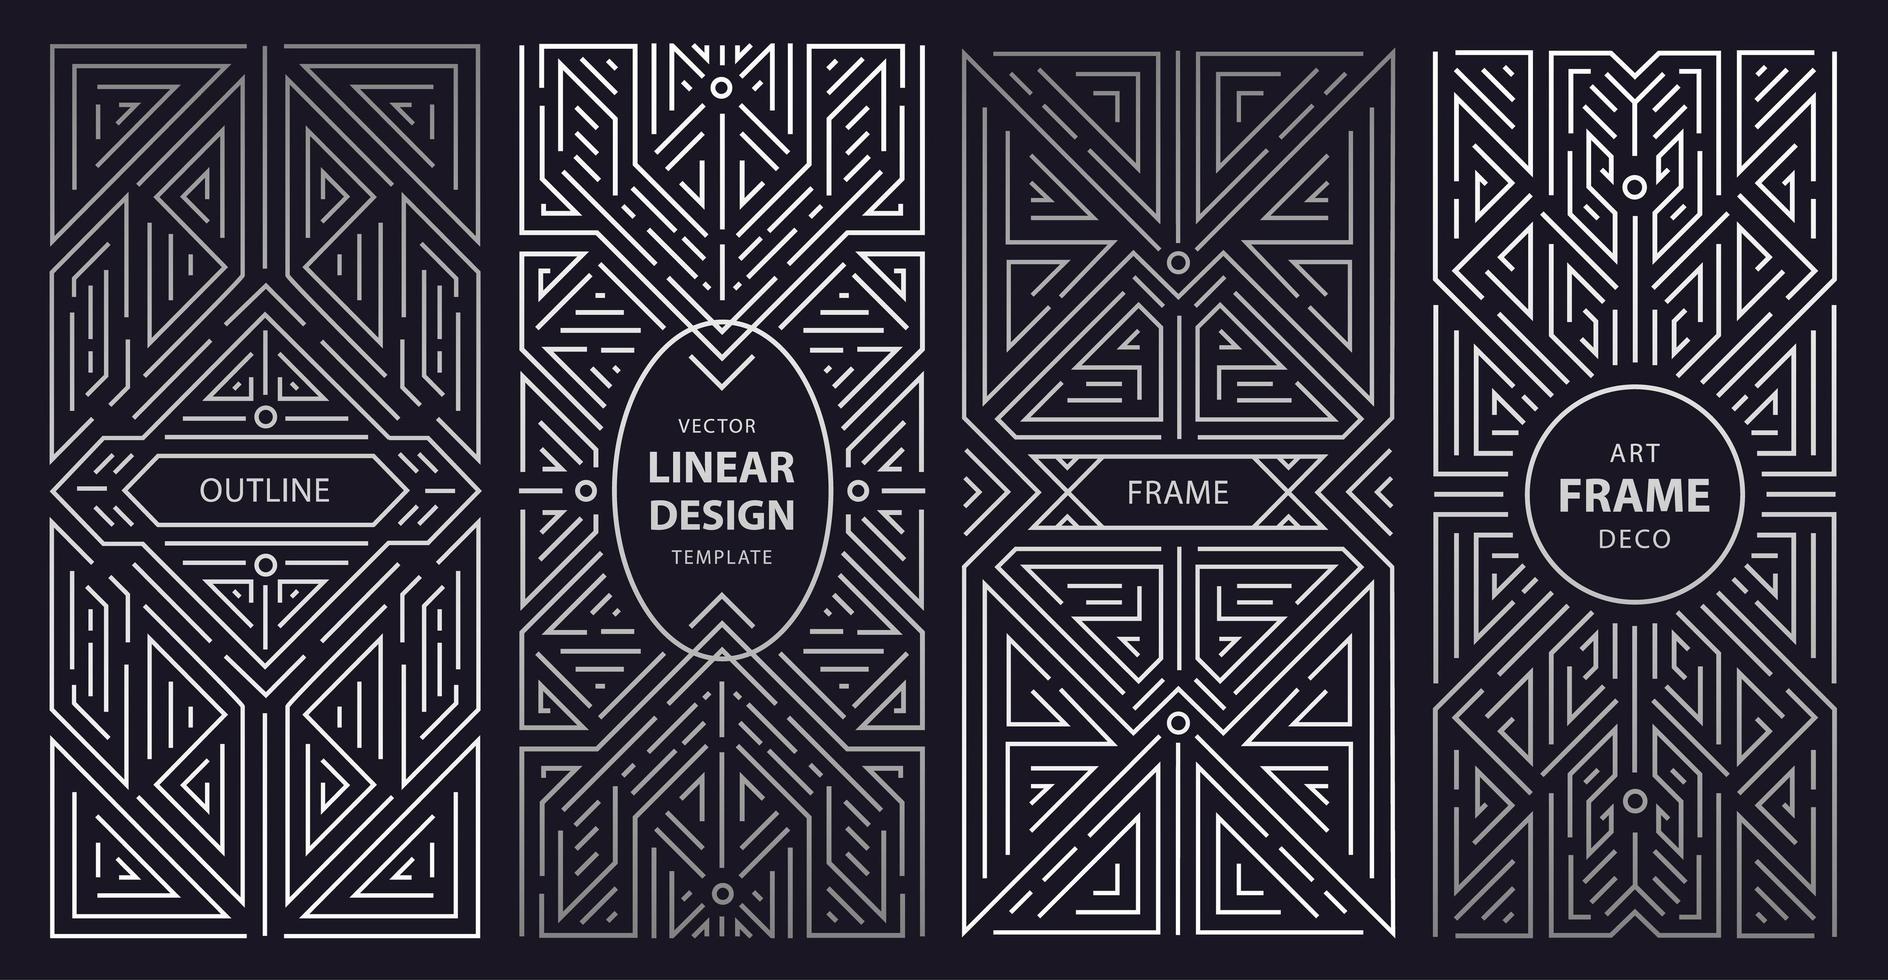 Vector set of abstract art deco banners, geometric background, retro vintage wedding invitations, packag design templates